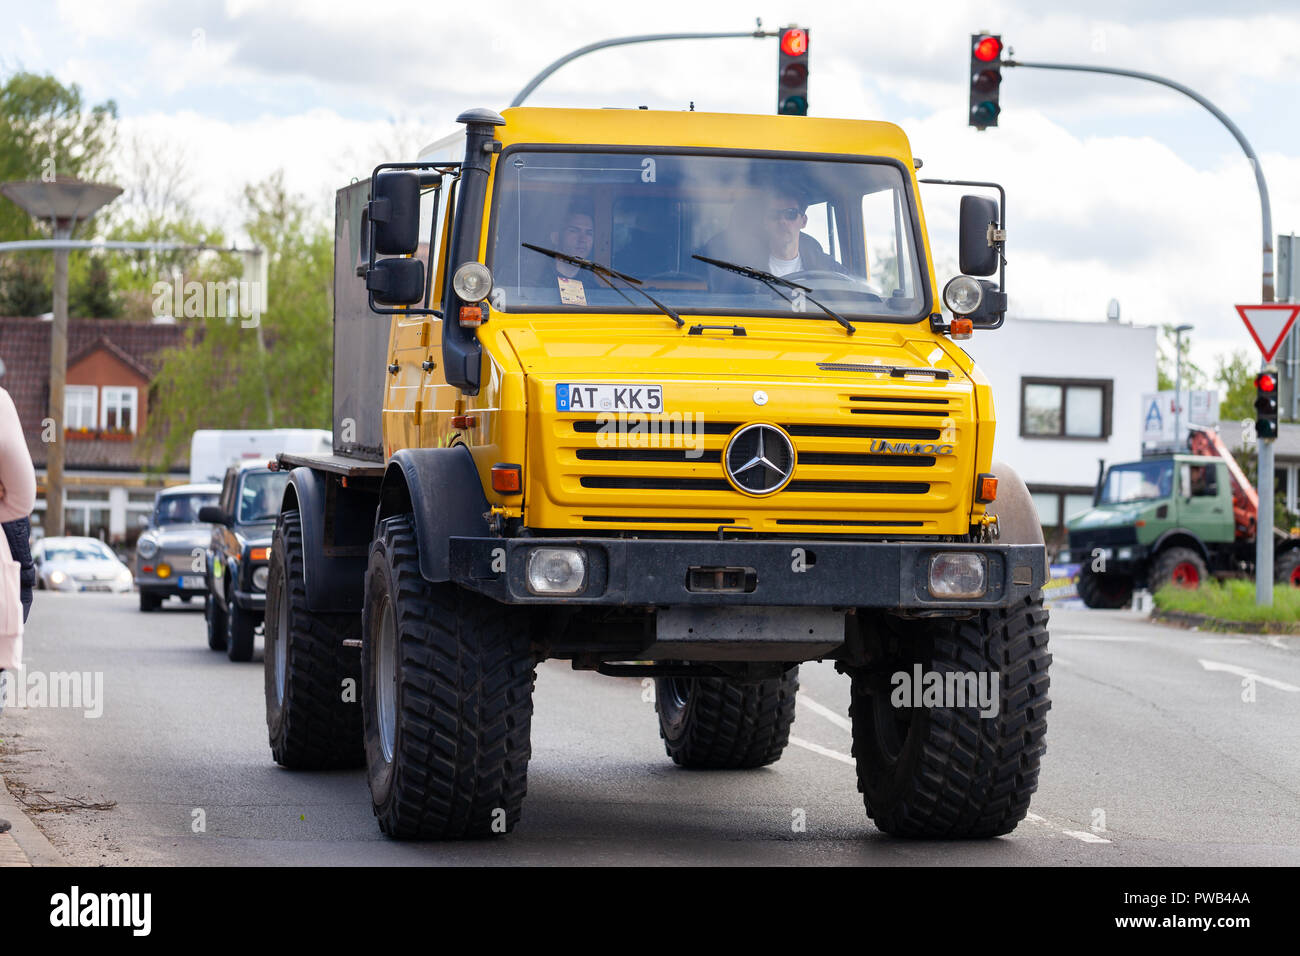 https://c8.alamy.com/comp/PWB4AA/altentreptow-germany-may-1-2018-mercedes-benz-unimog-drives-on-street-at-an-oldtimer-show-PWB4AA.jpg